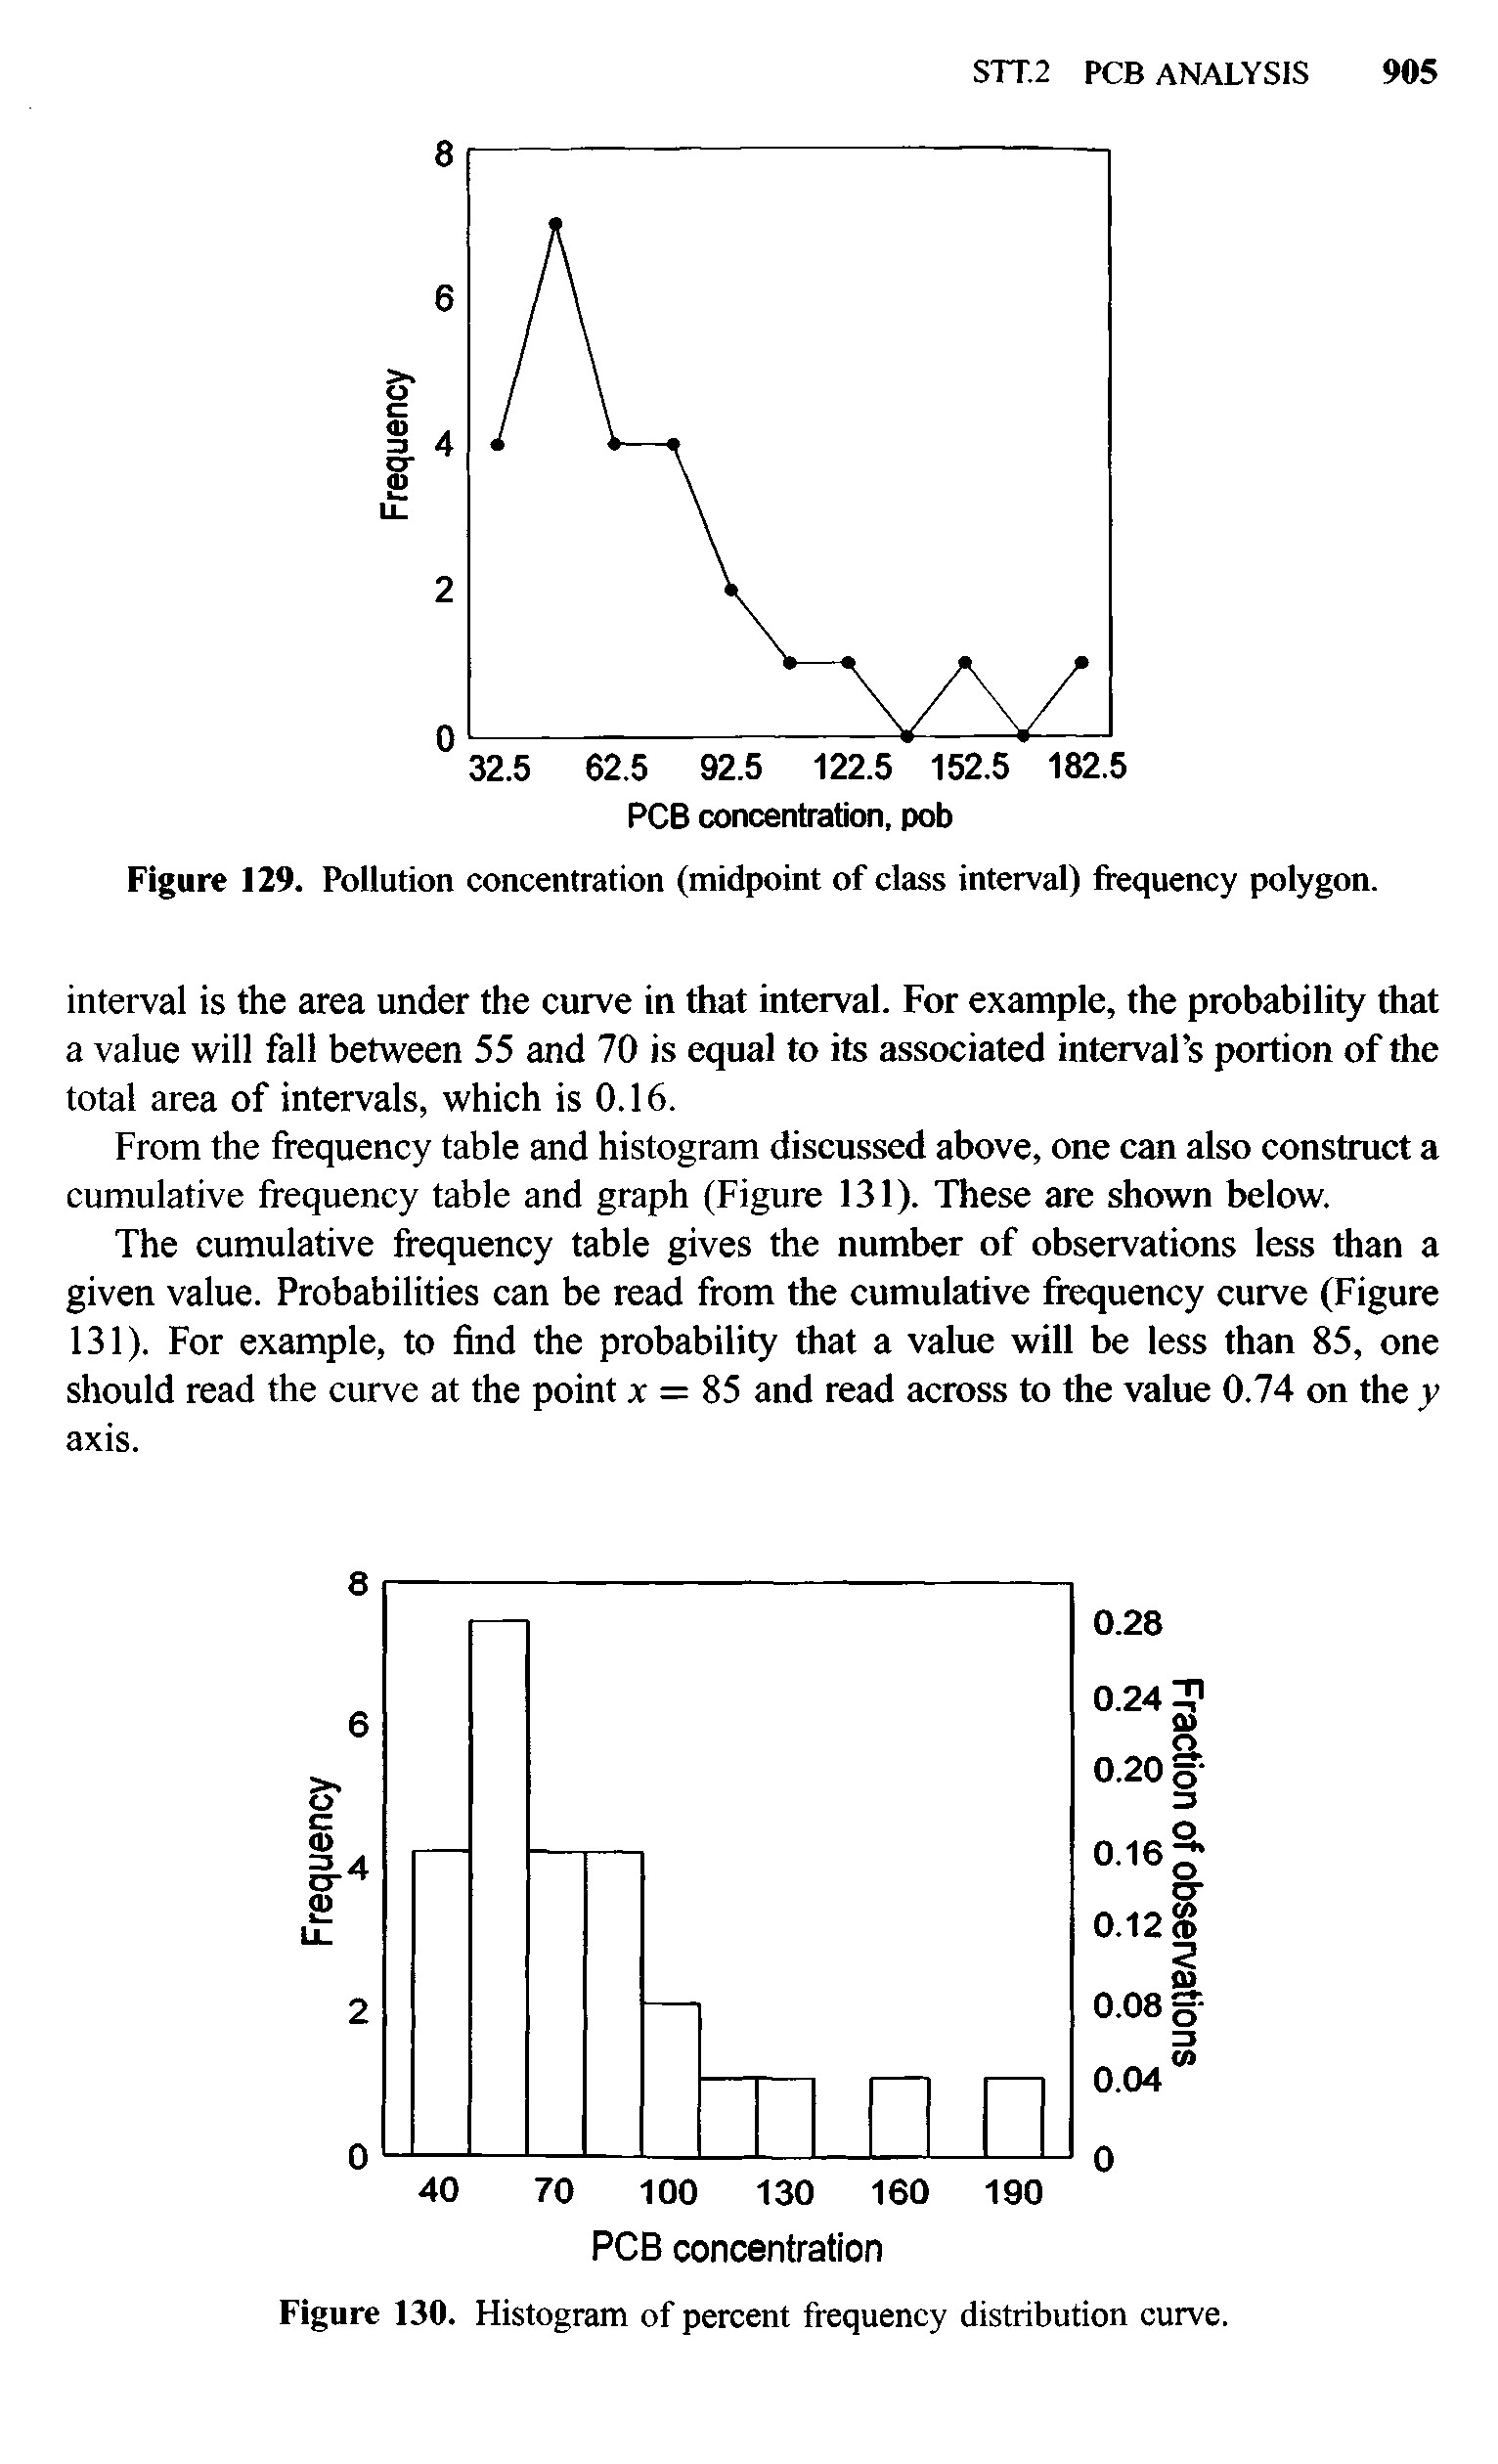 Figure 129. Pollution concentration (midpoint of class interval) frequency polygon.